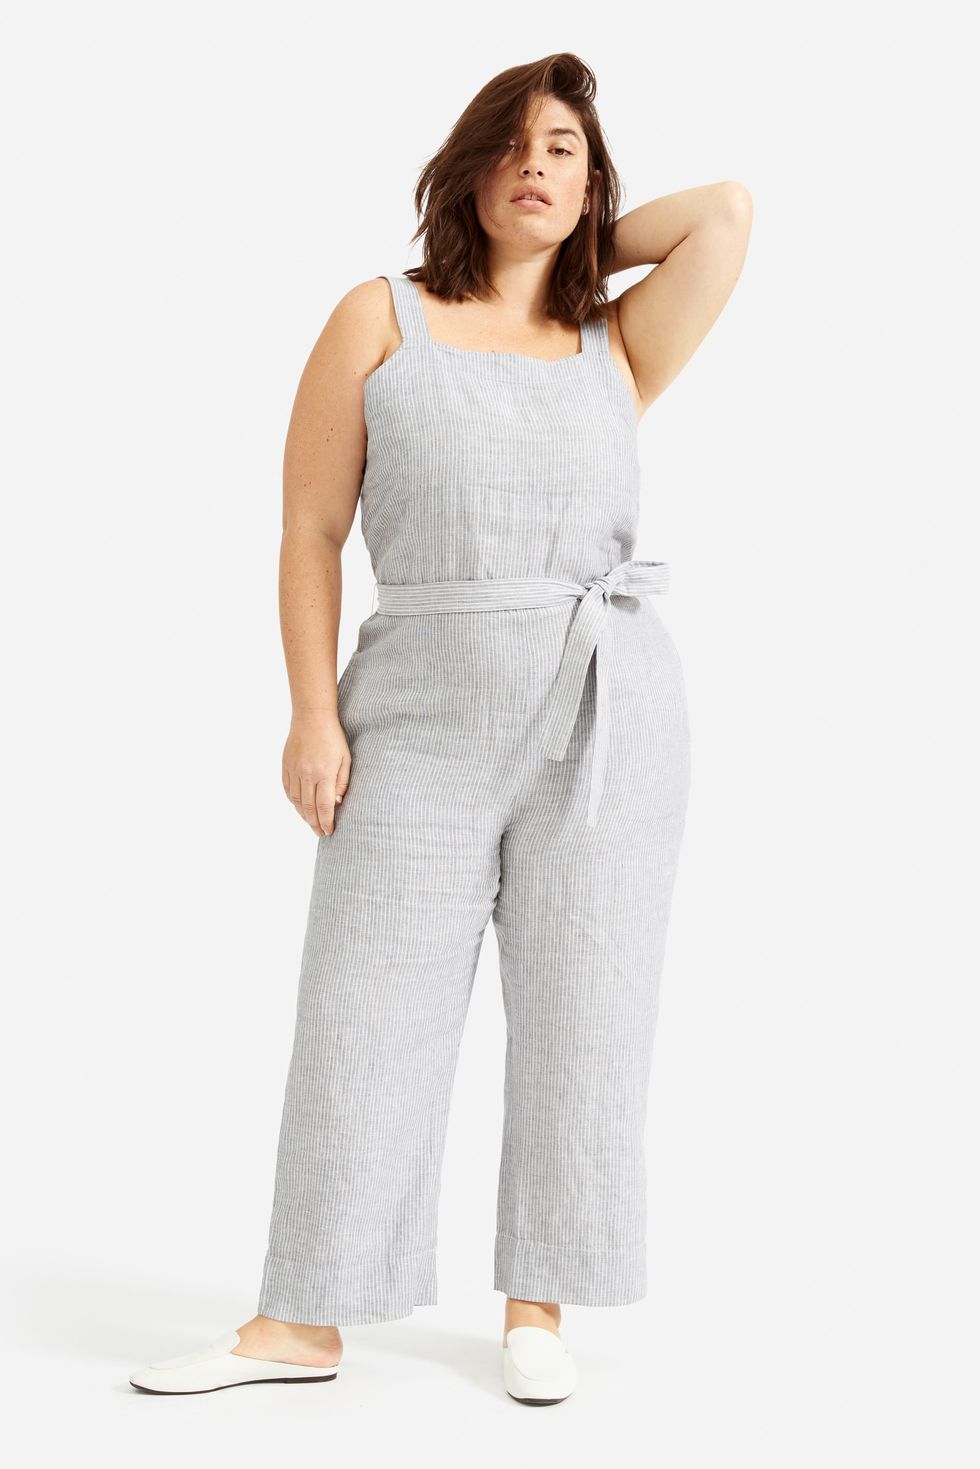 20 Gray Outfit Ideas for 2020 — Best Groutfits to Shop